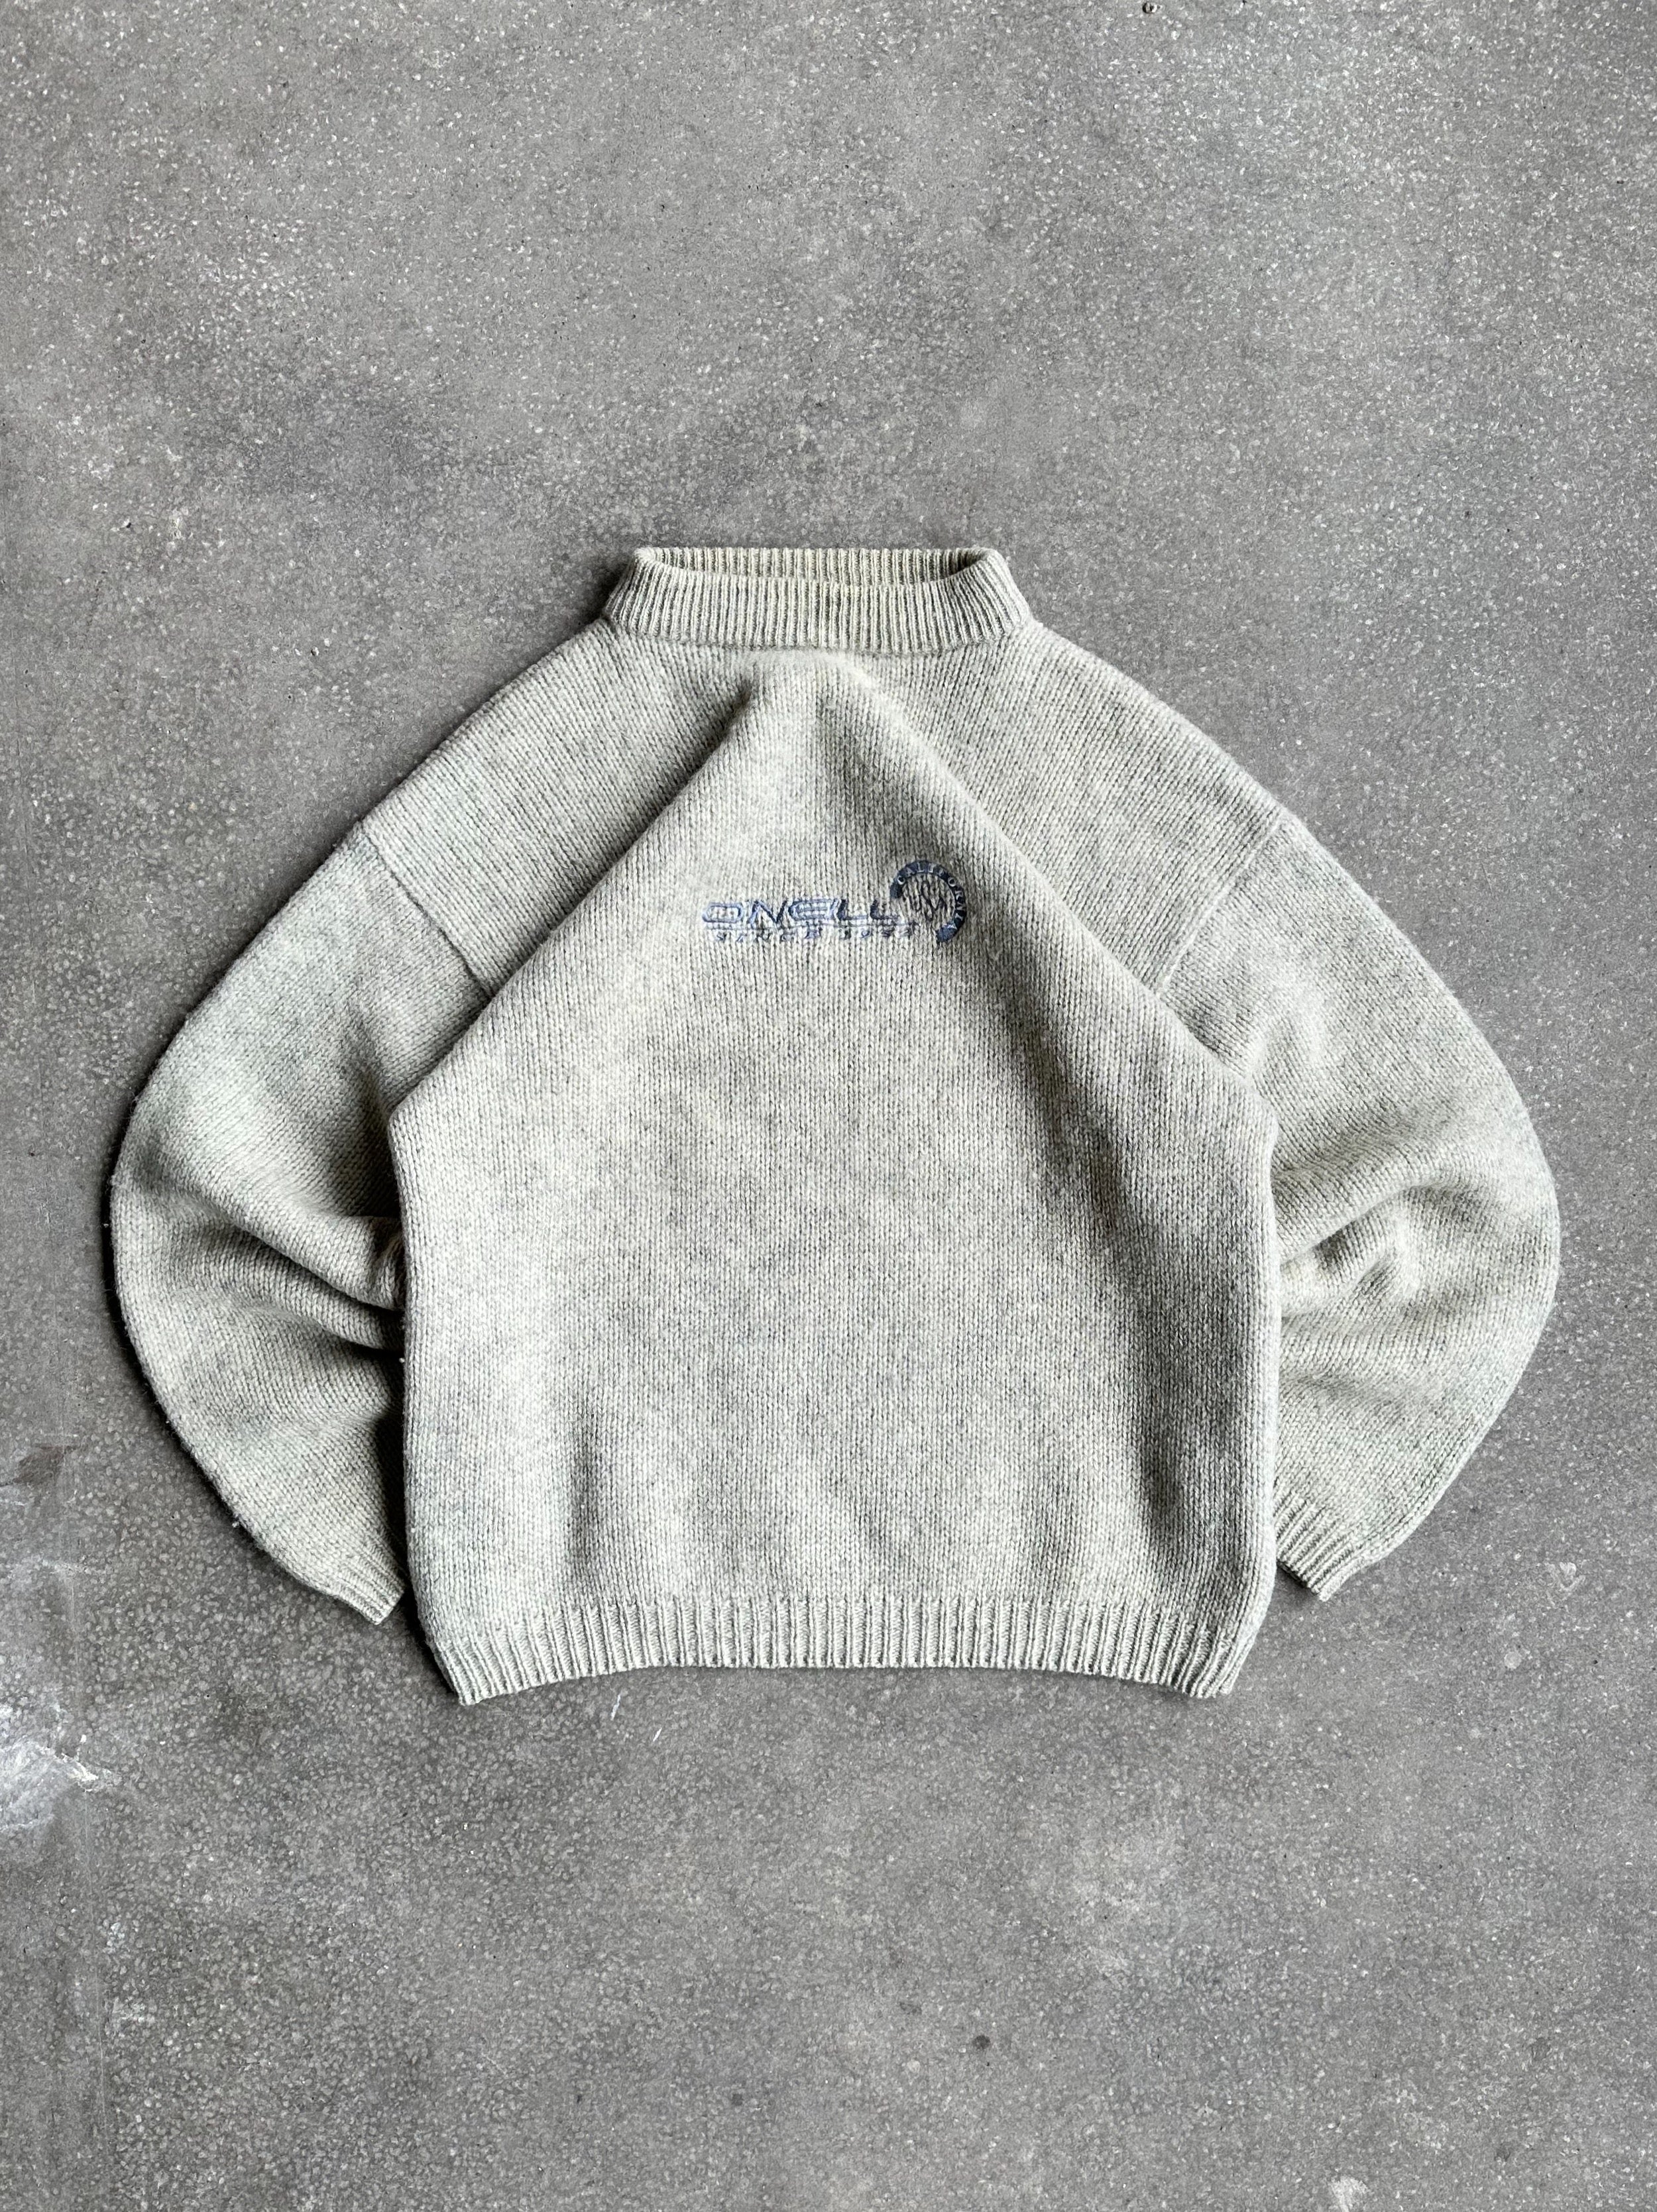 Vintage O'Neill Knitted Sweater - Medium